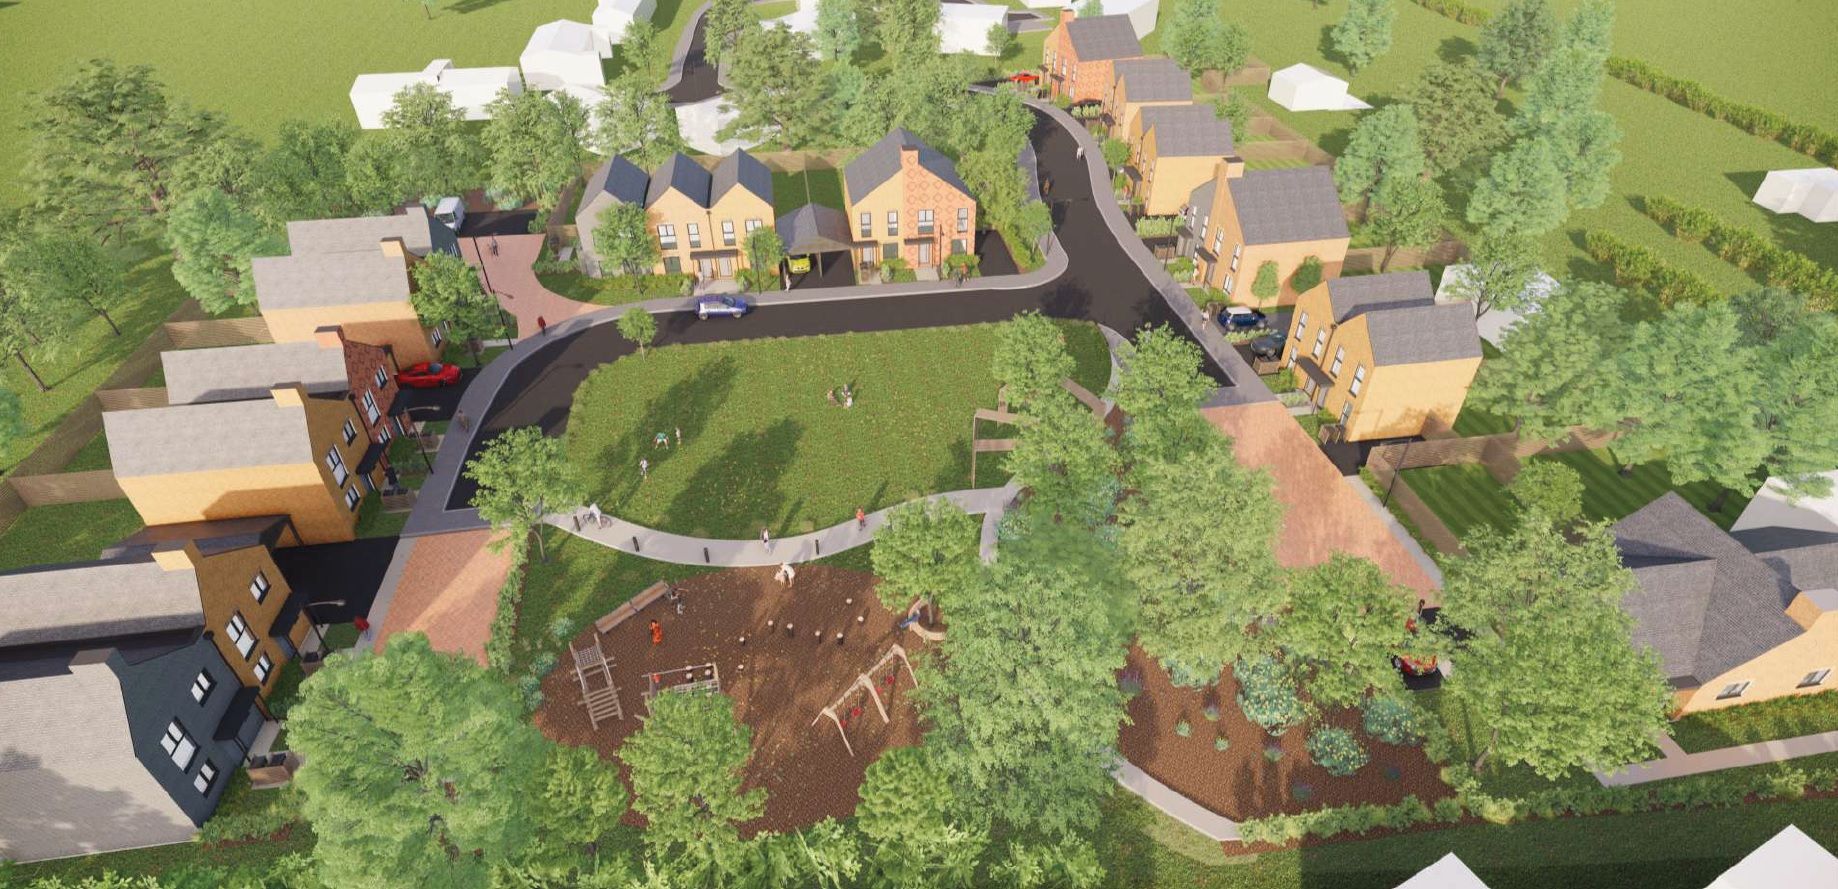 Artist impression of how the Laurels Avenue site will look.